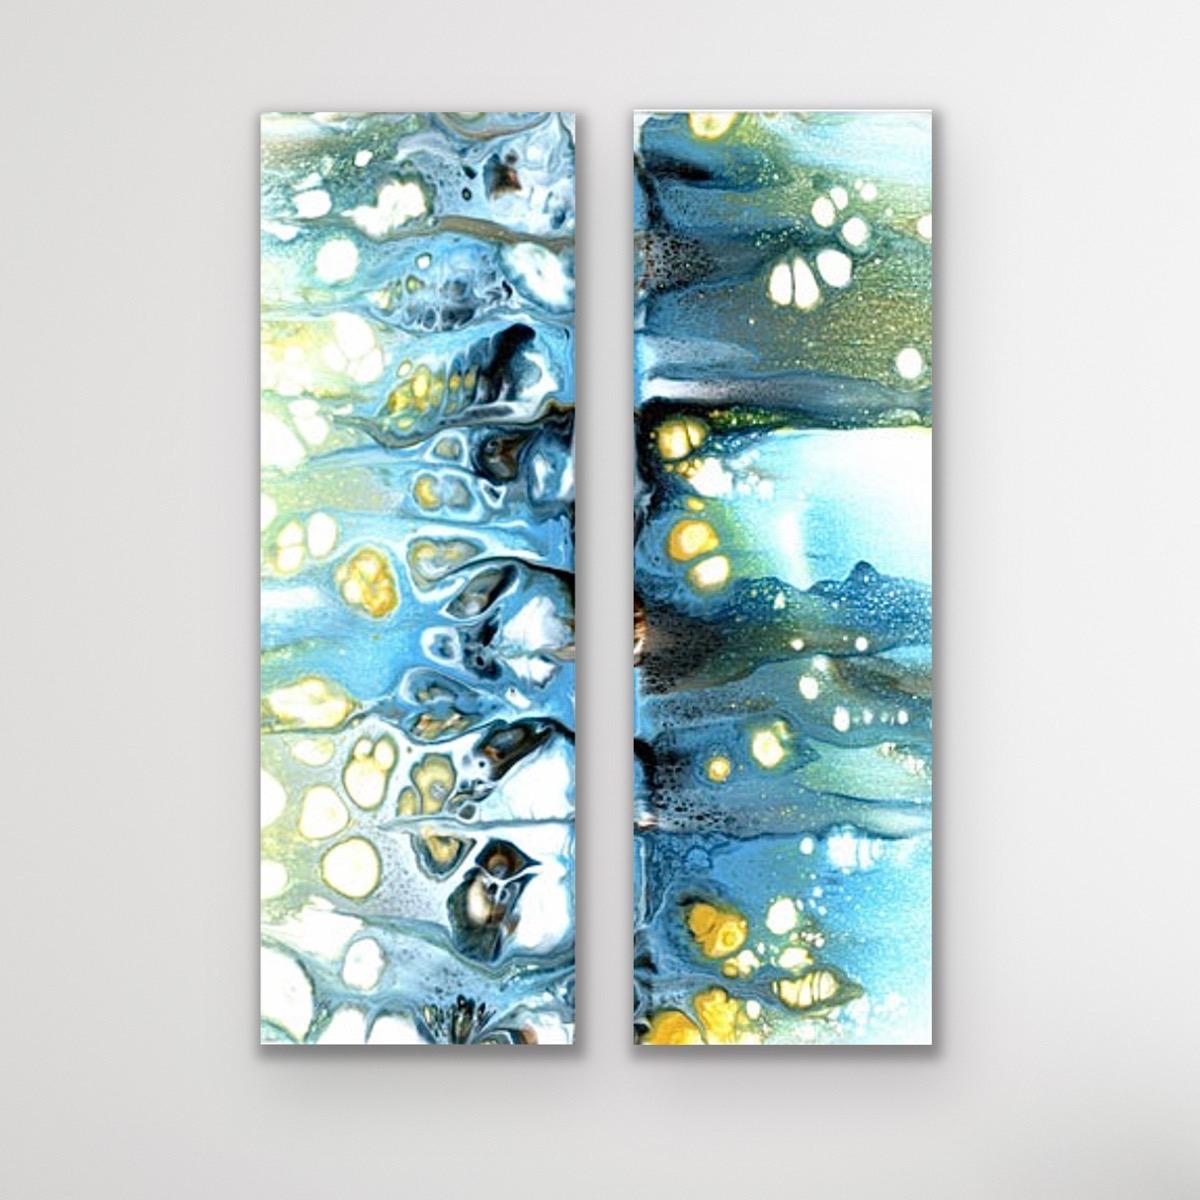 Modern Abstract Painting Diptych, Celeste Reiter, Signed Limited Edition Giclee’